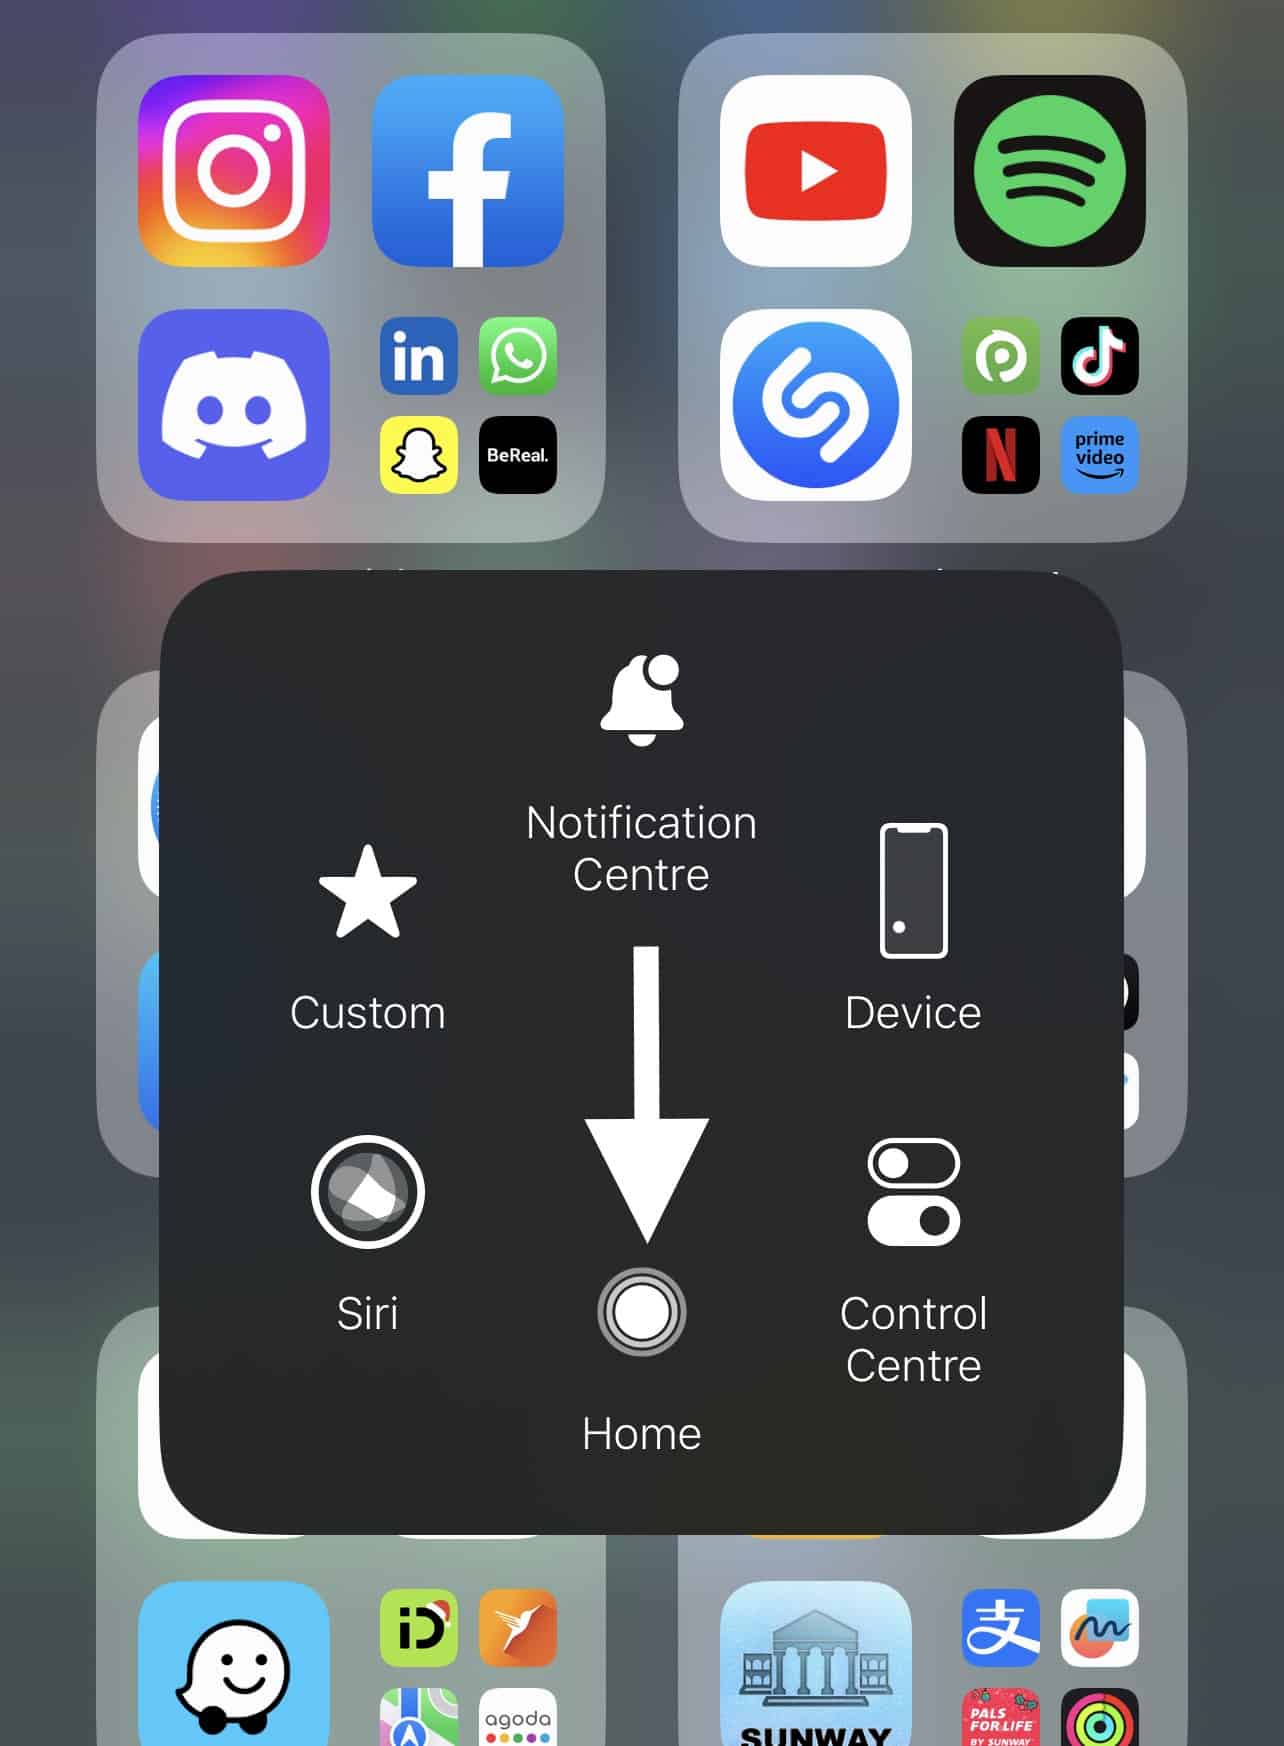 Force close the app to completely restart to fix BeReal not working or loading